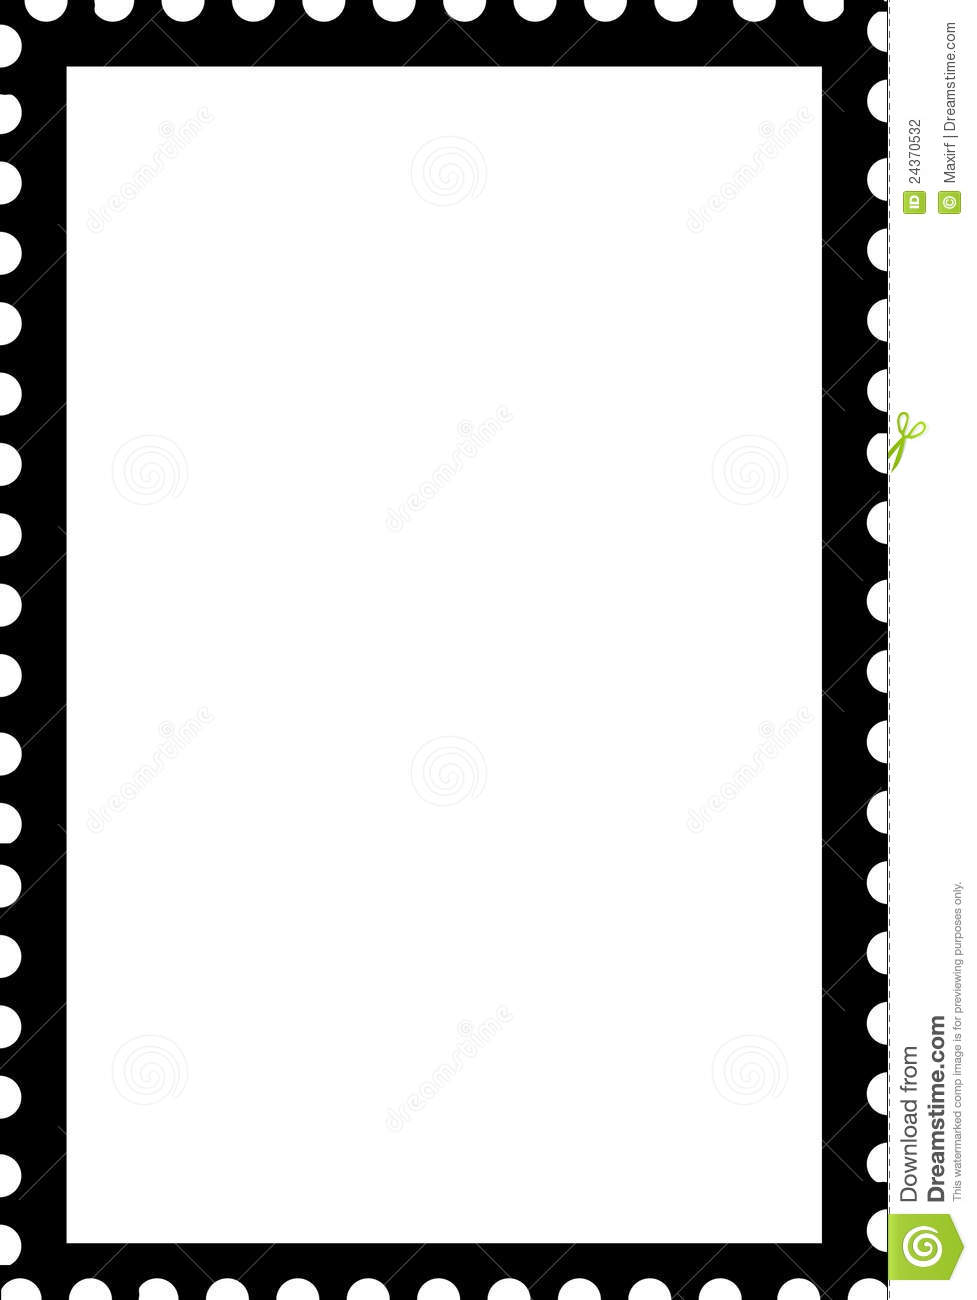 Stamp   Clipart Panda   Free Clipart Images